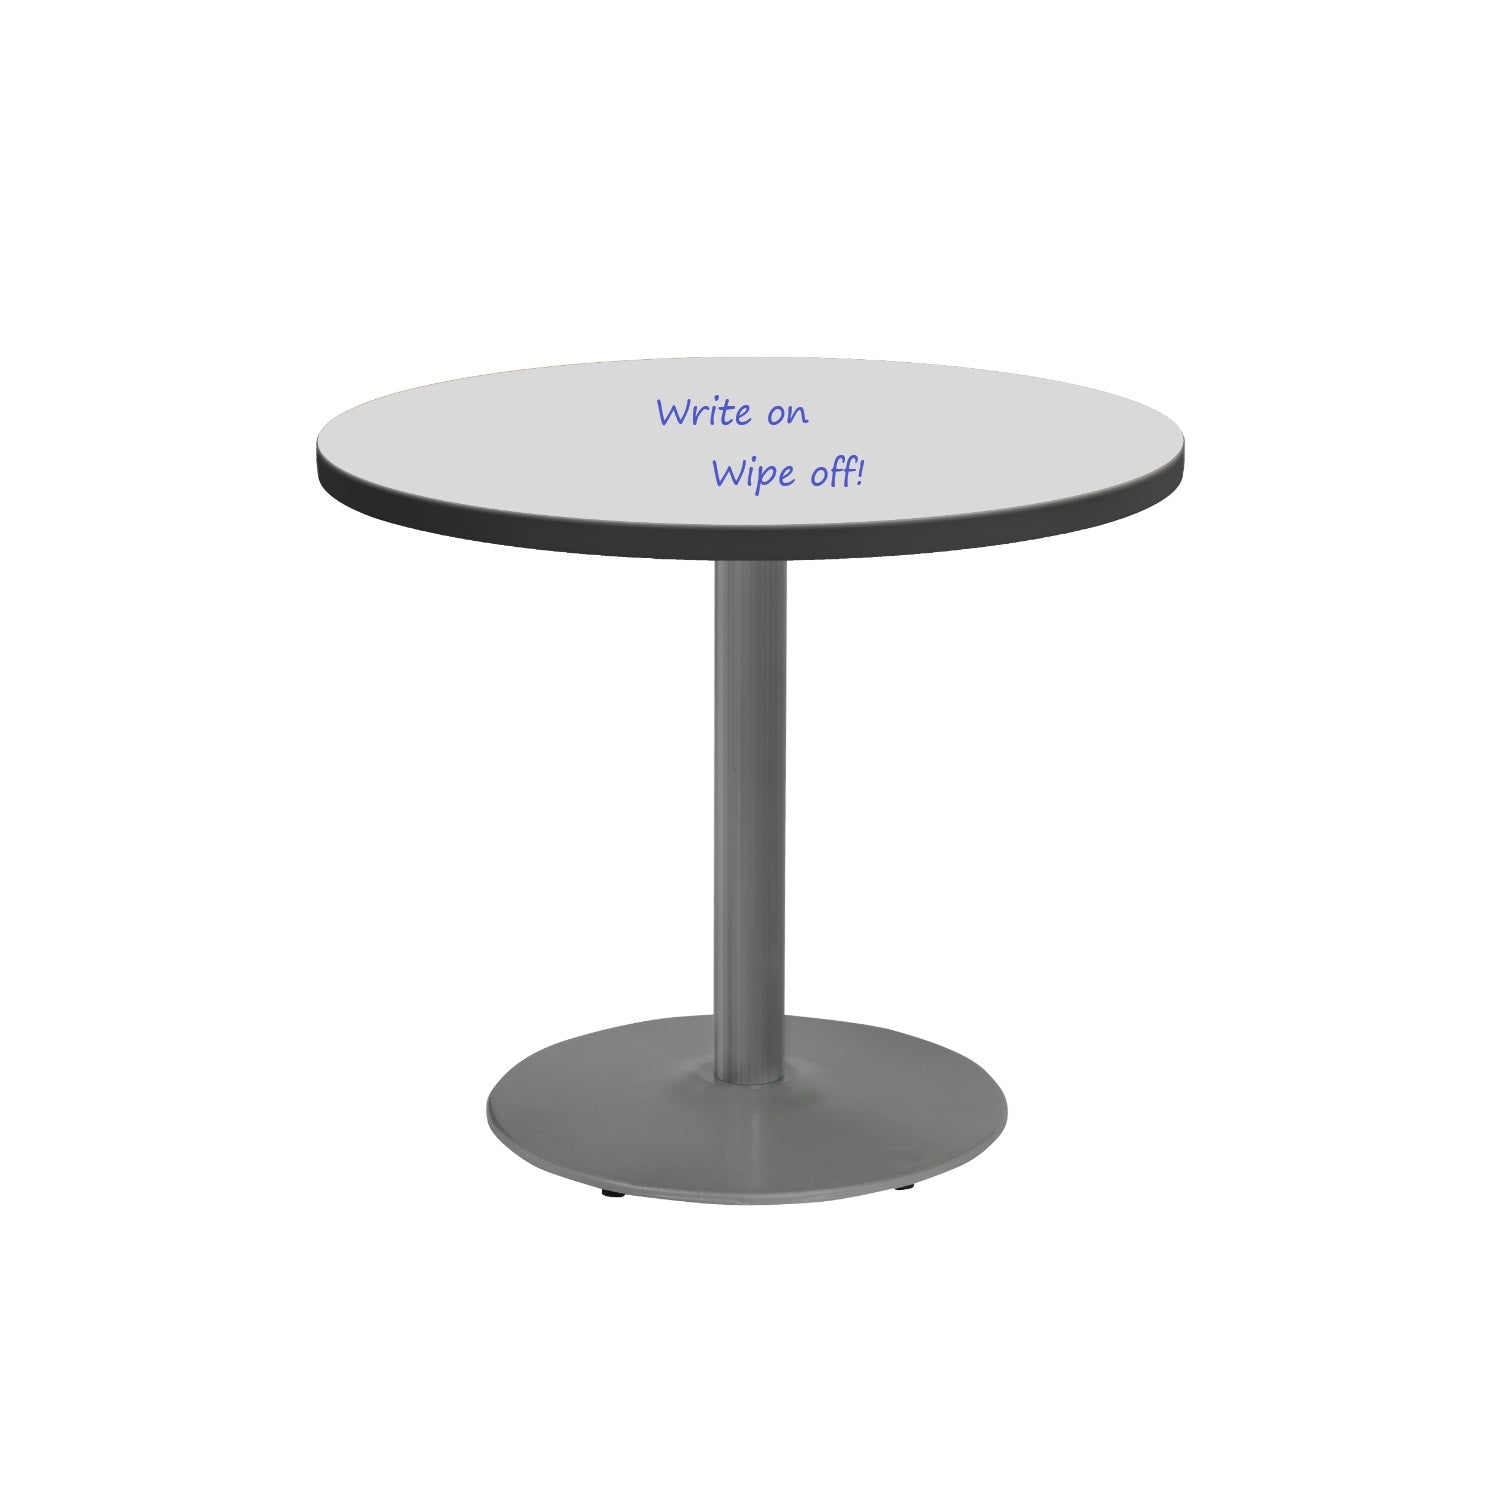 30" Round Sitting Height Café Table with Dry-Erase Whiteboard Top